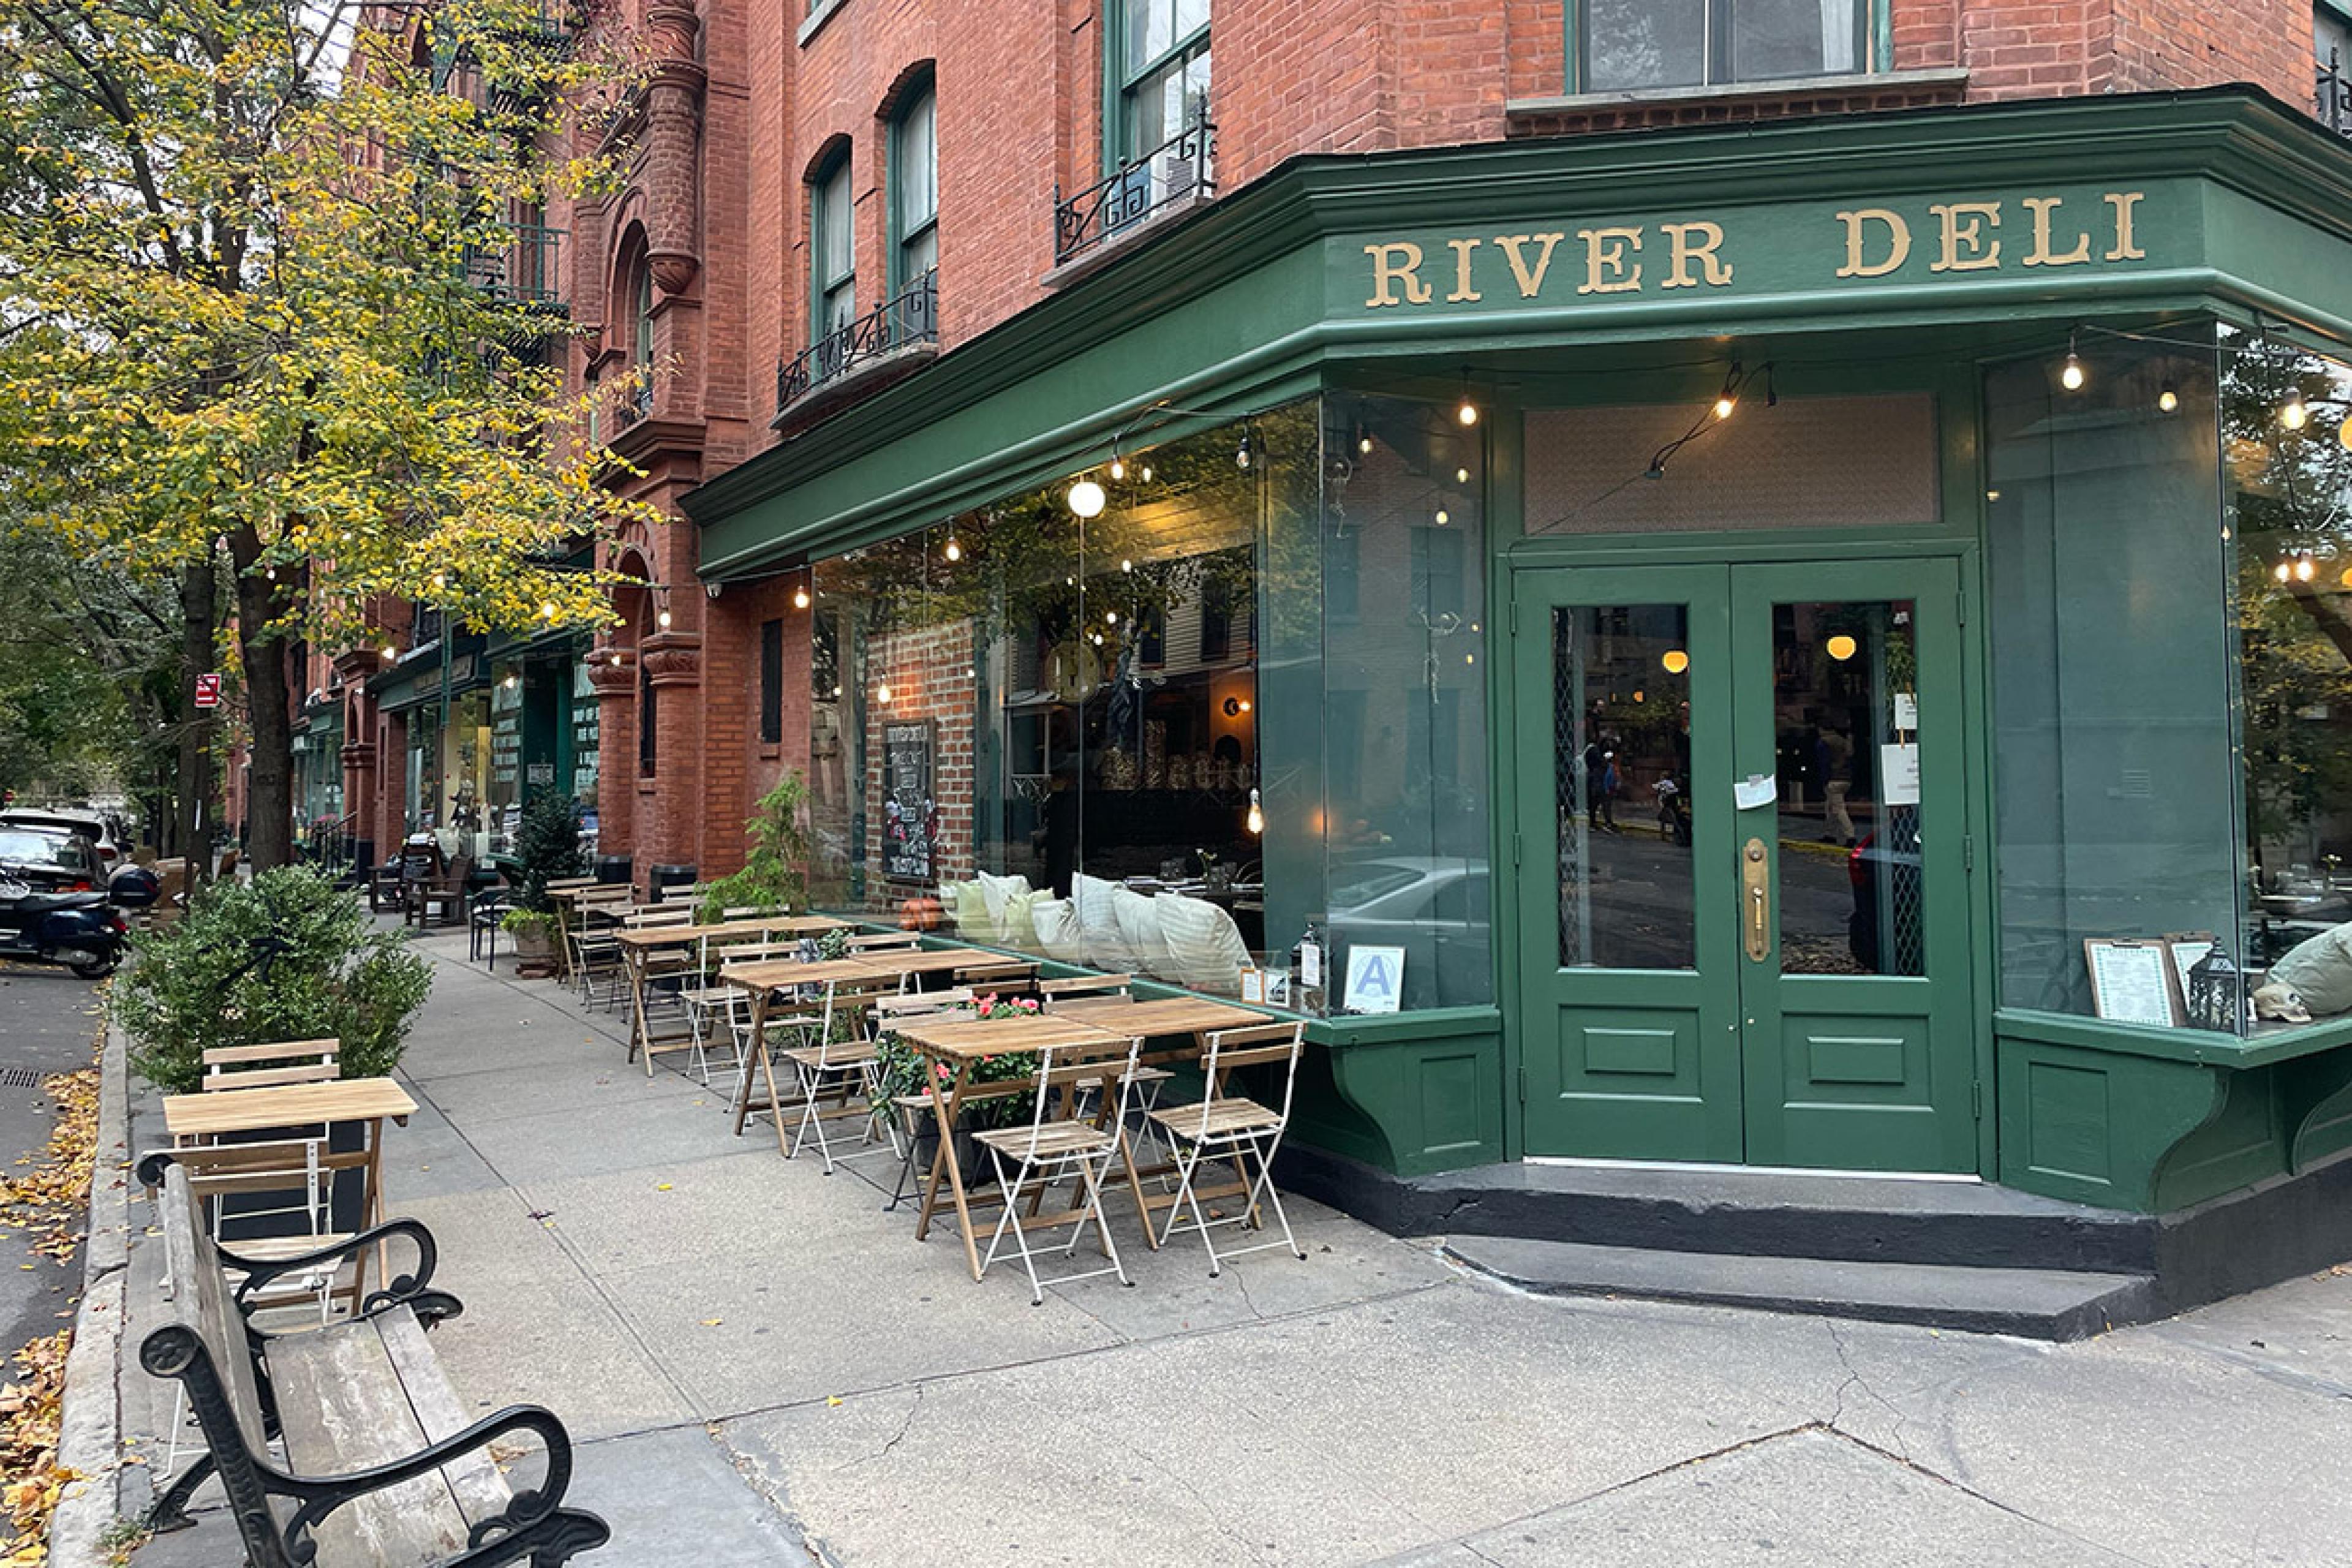 corner restaurant with green paint and red brick with sign saying river deli